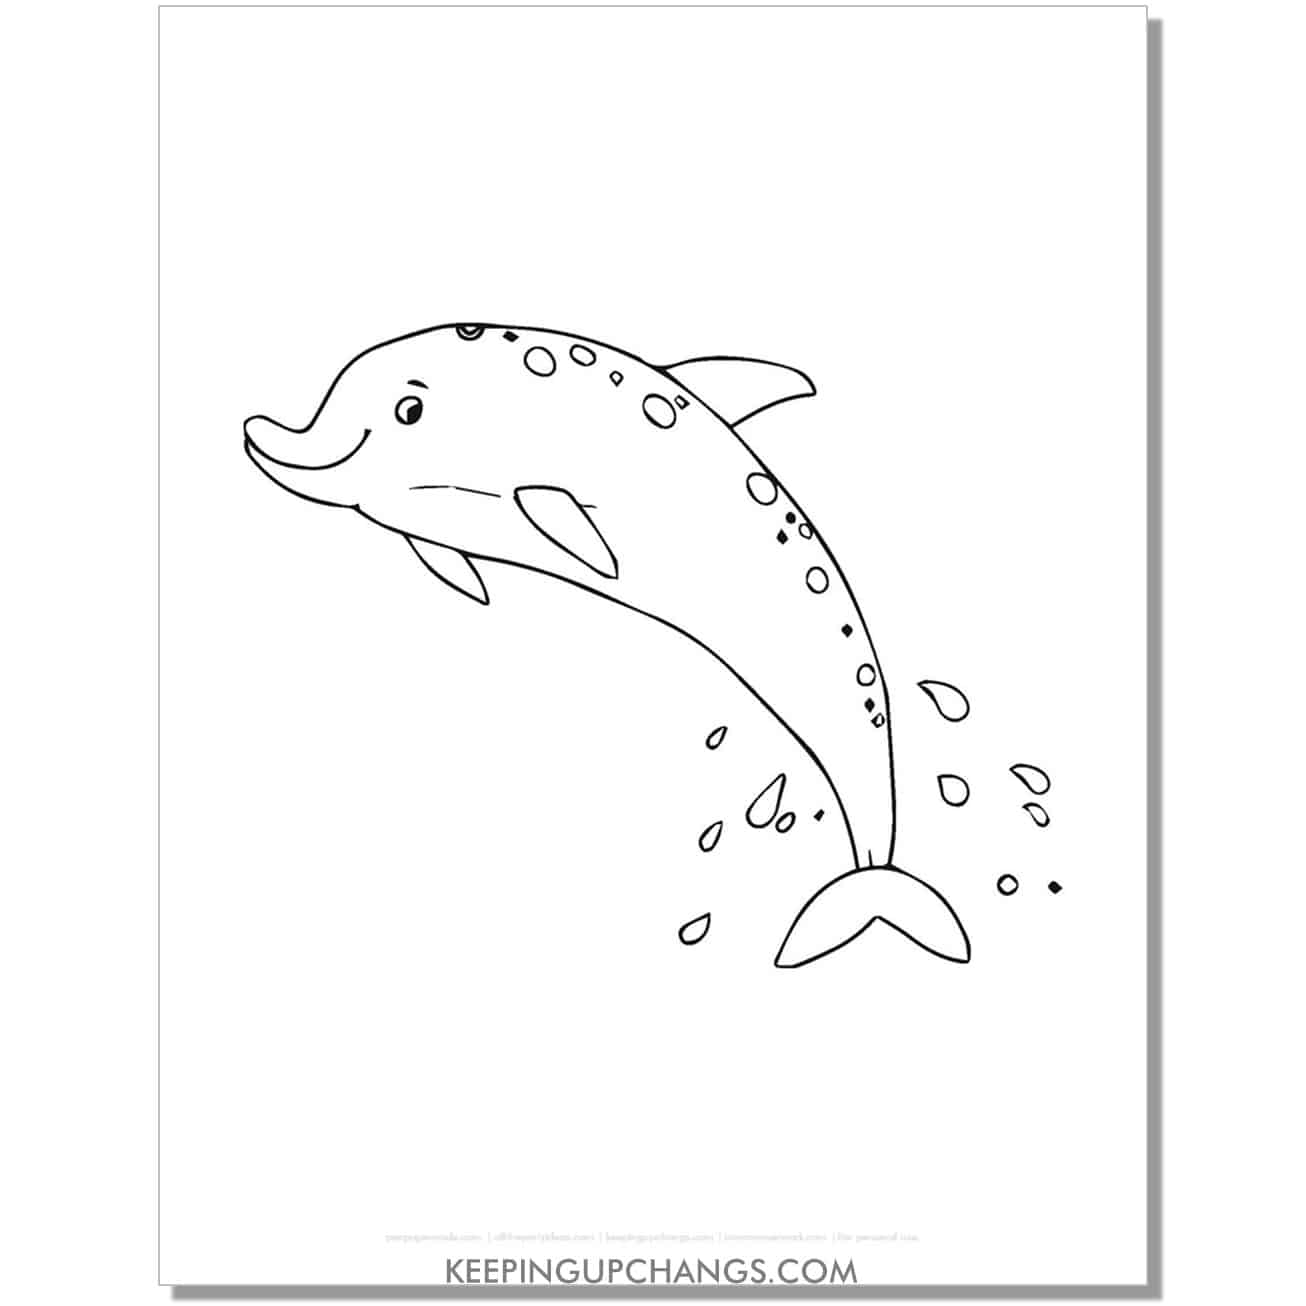 free dolphin with spots coloring page, sheet.